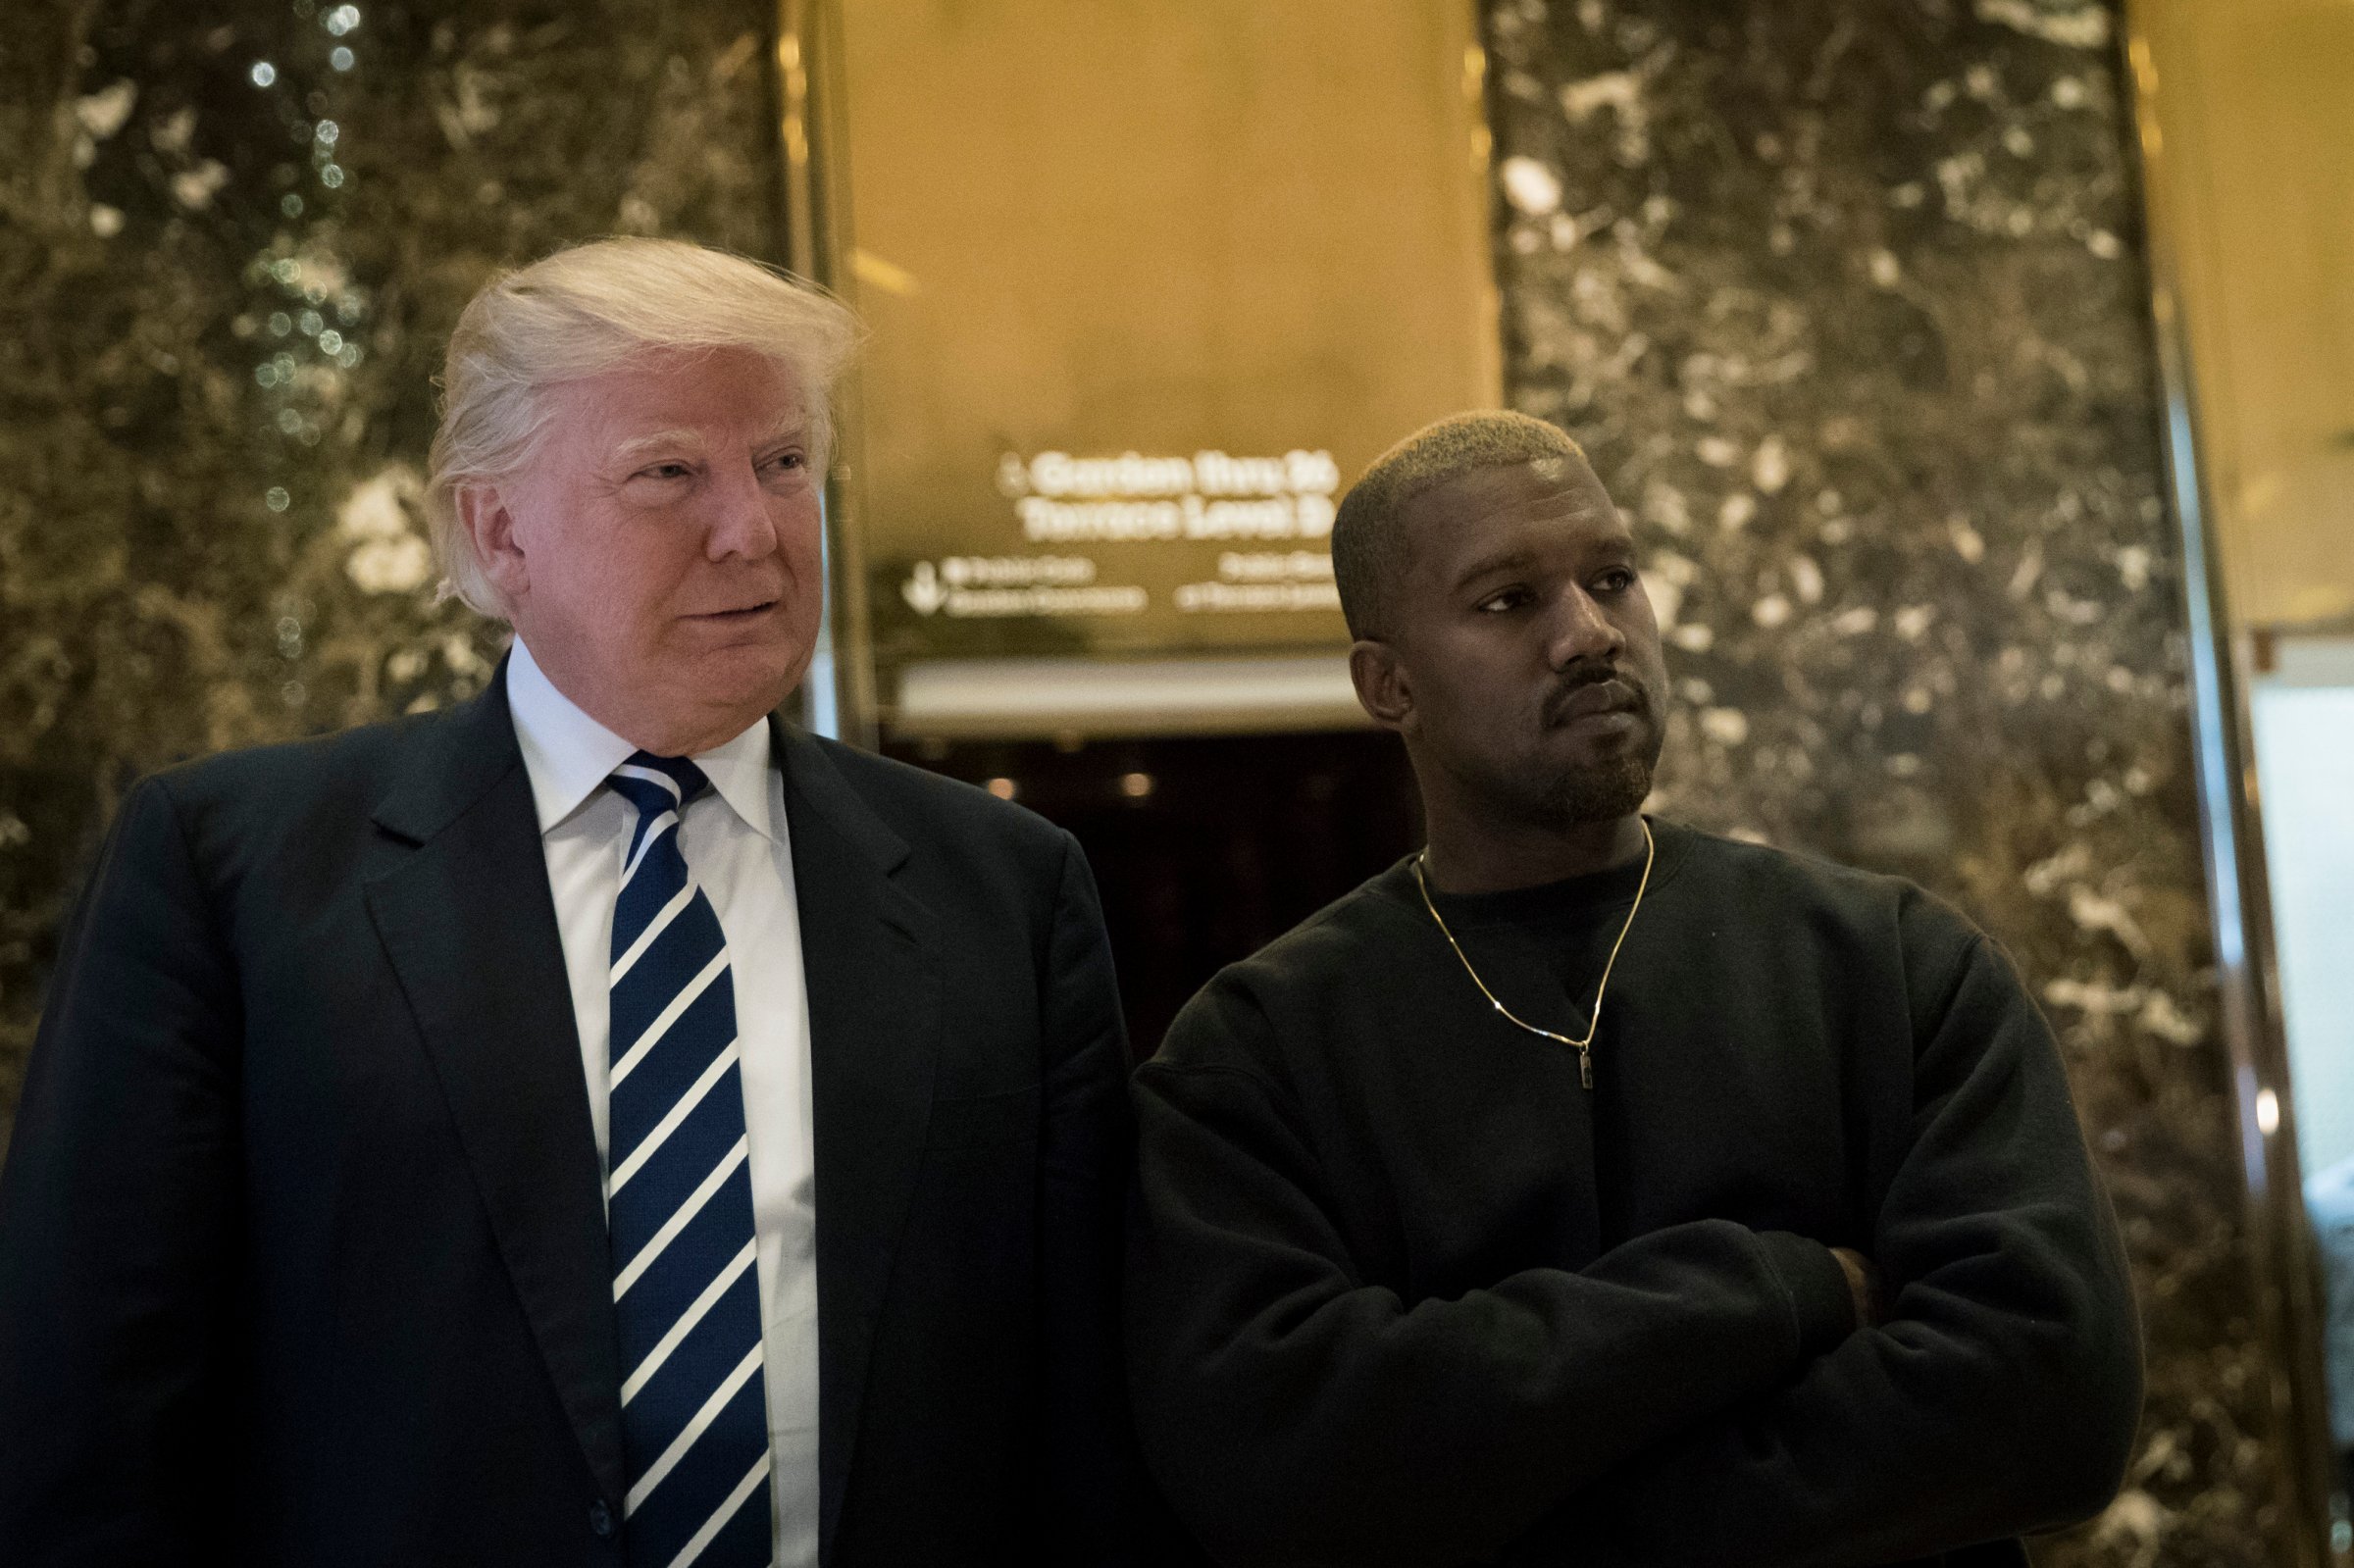 (L to R) President-elect Donald Trump and Kanye West stand together in the lobby at Trump Tower, December 13, 2016 in New York City.